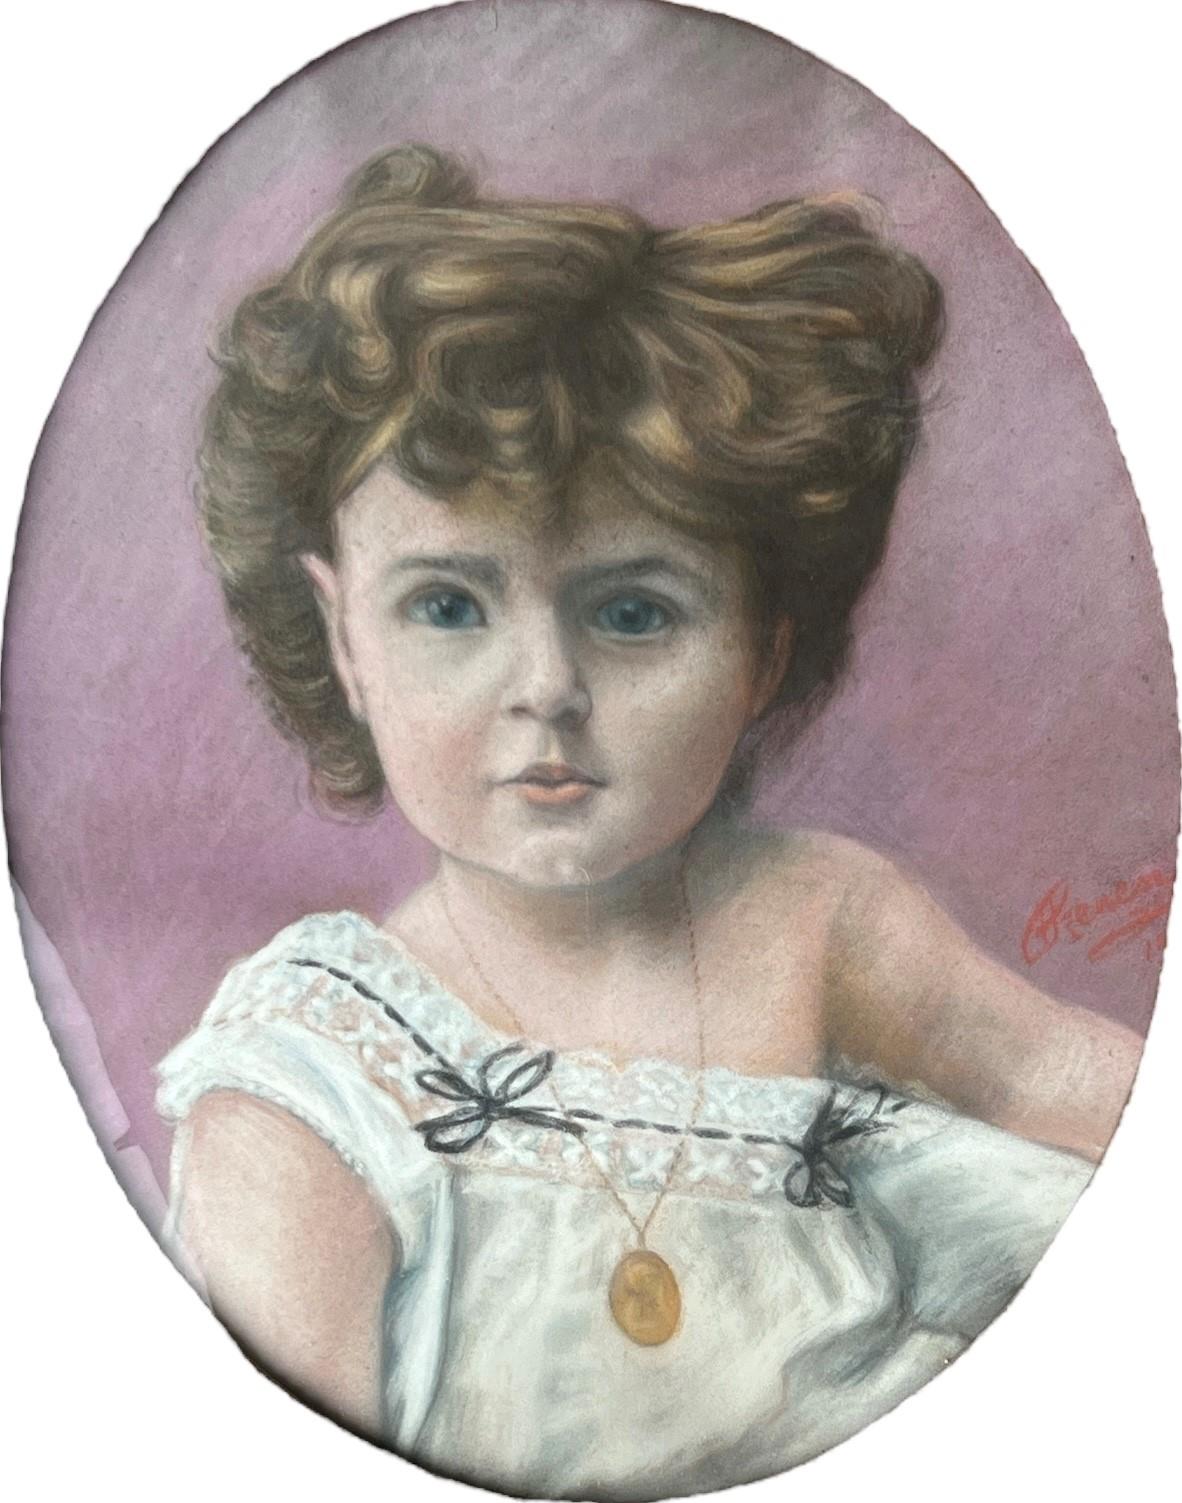 A 20TH CENTURY OVAL PASTEL PORTRAIT OF A YOUNG GIRL Indistinctly signed lower right, held in a - Image 3 of 5